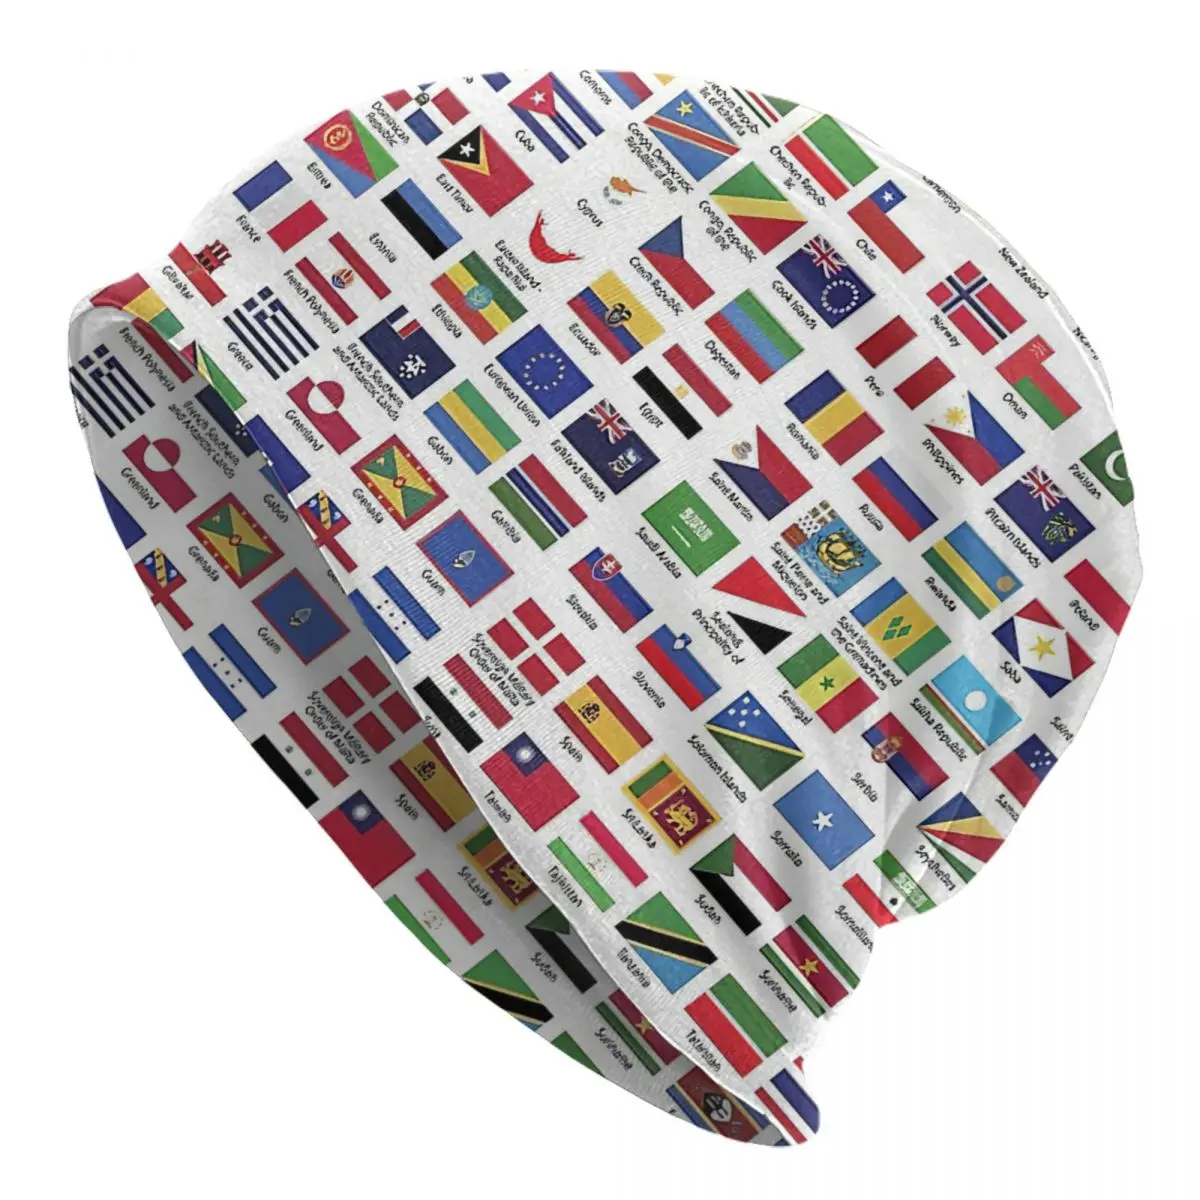 World Flags With Country Names Adult Men's Women's Knit Hat Keep warm winter Funny knitted hat